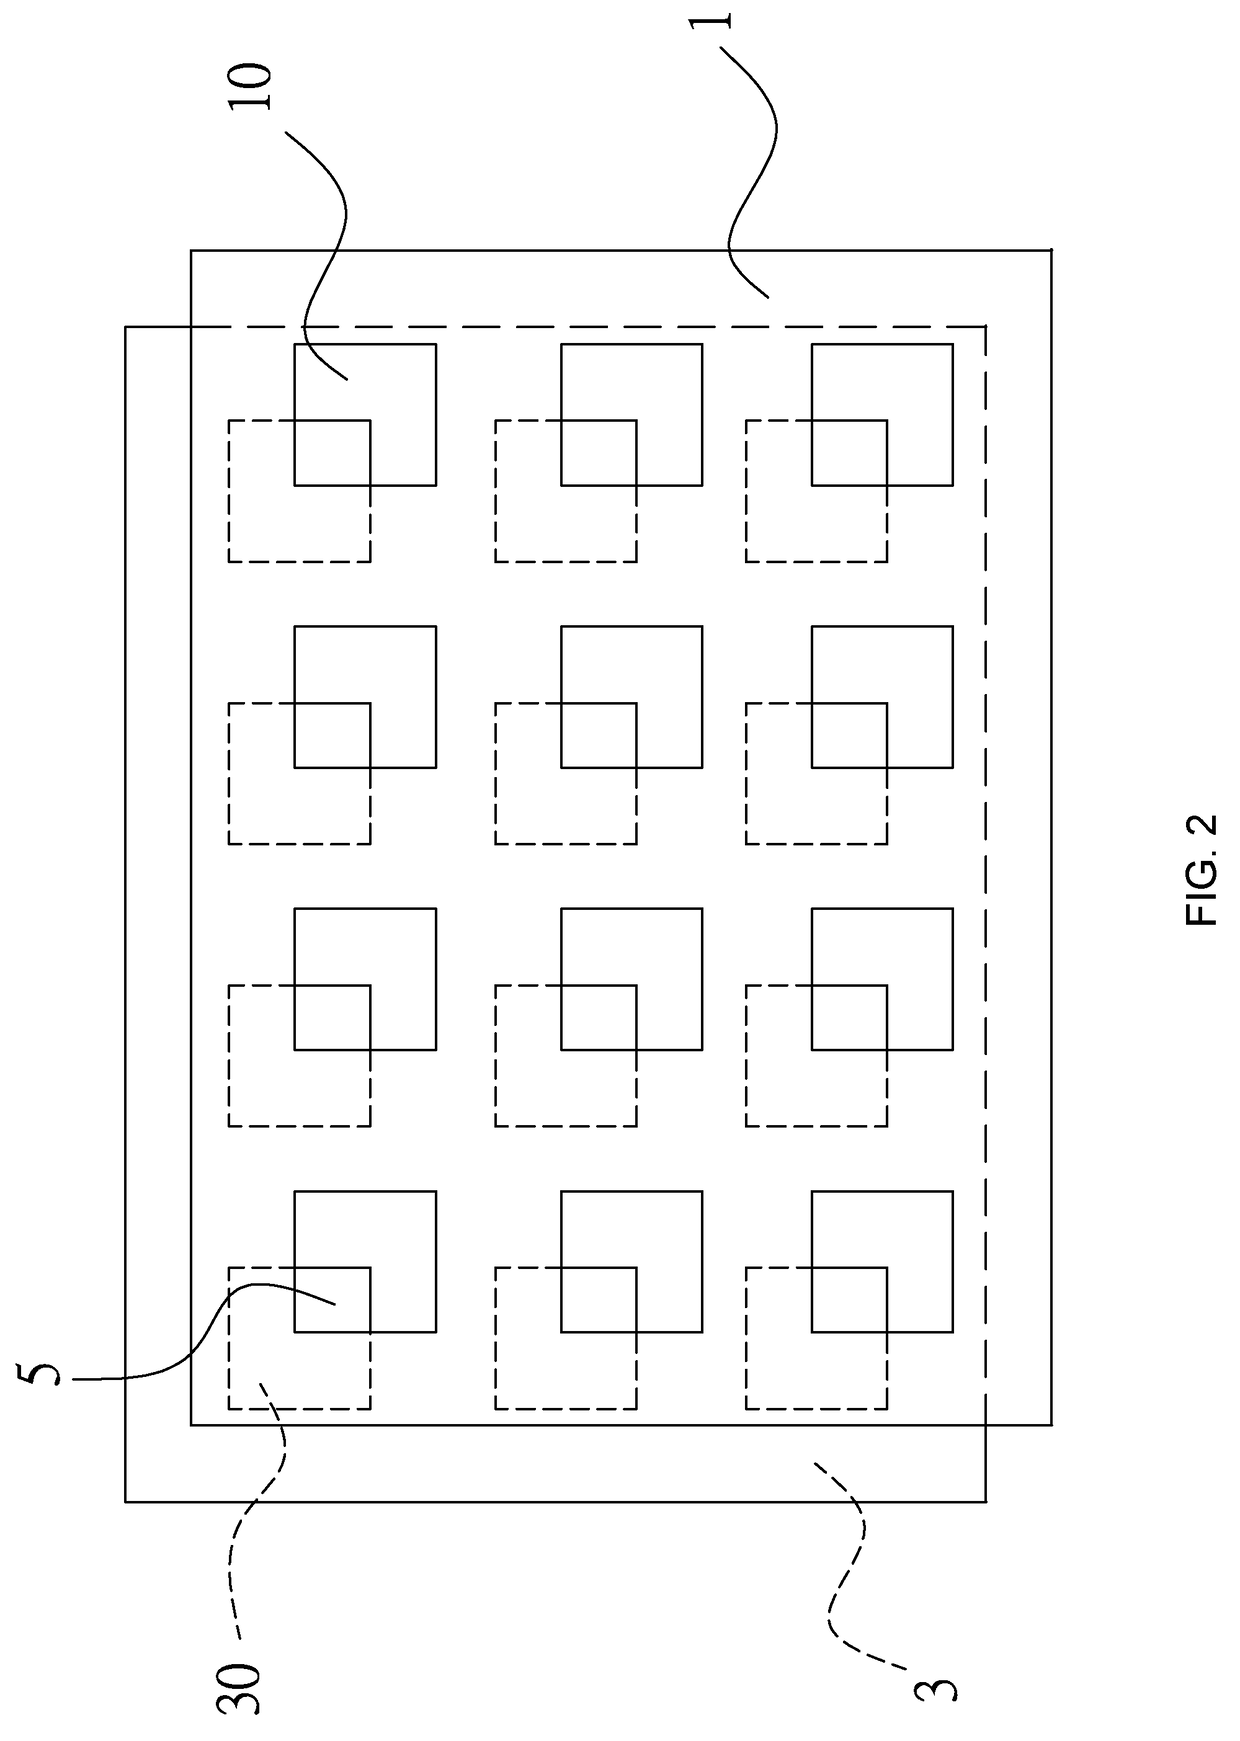 Acoustic board having displaced and passably abutted multiple through holes